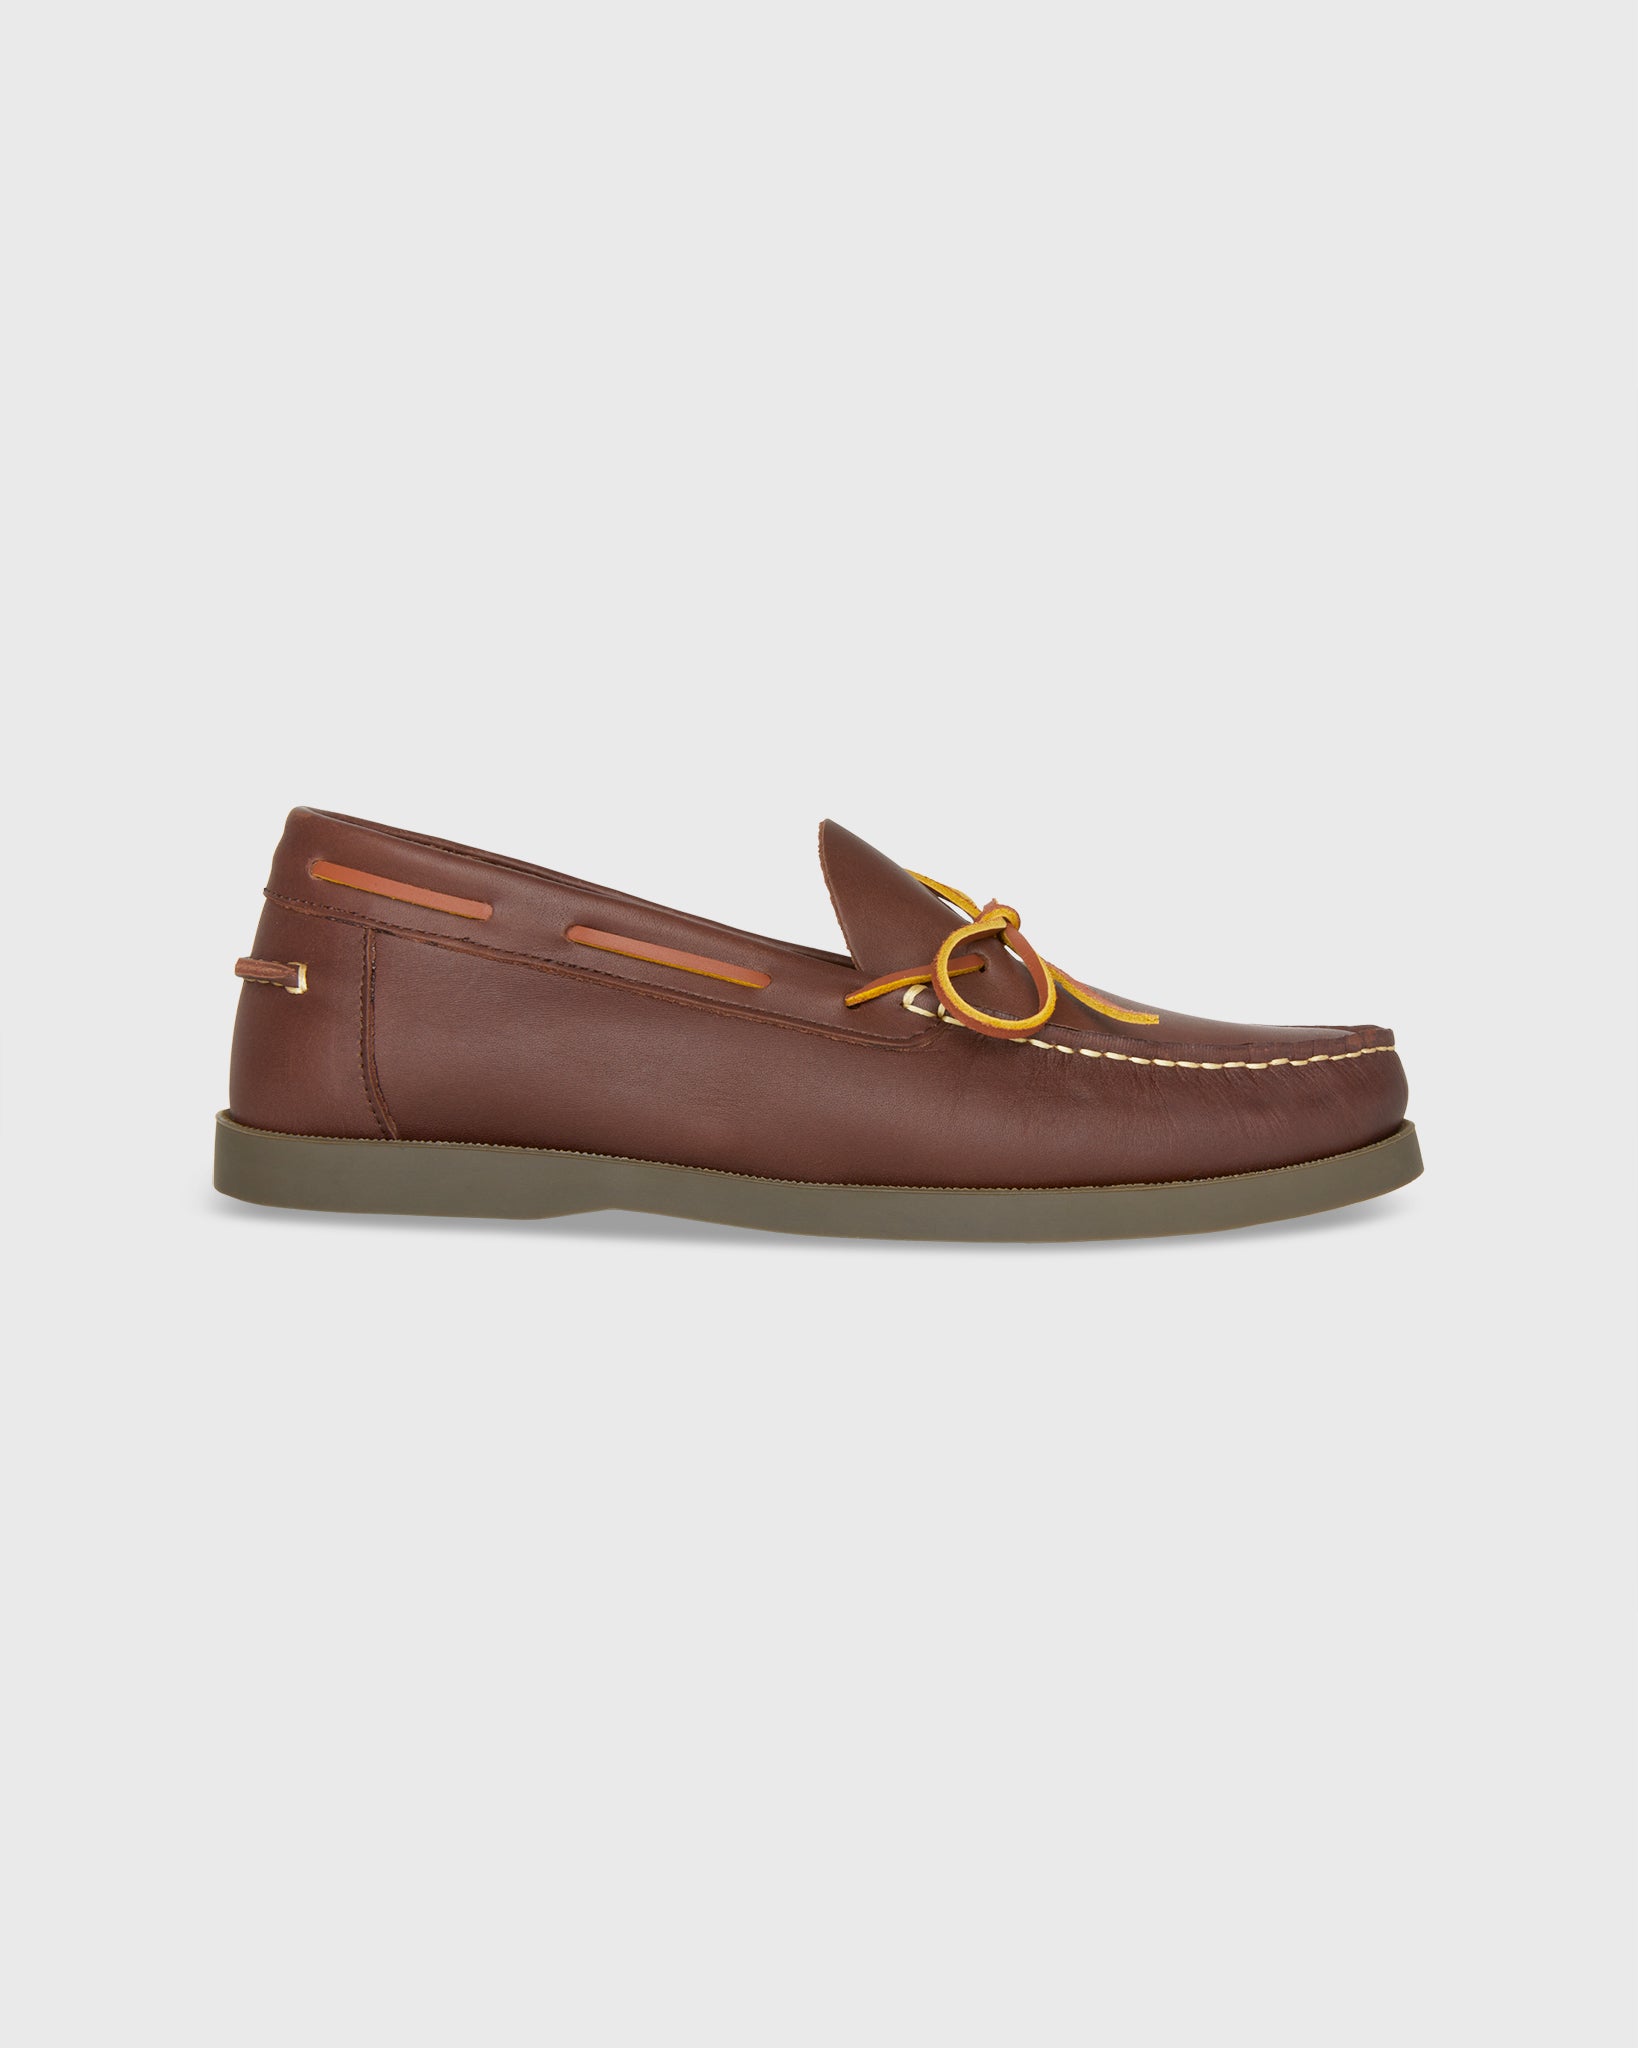 Camp Moccasin in Dark Brown Leather